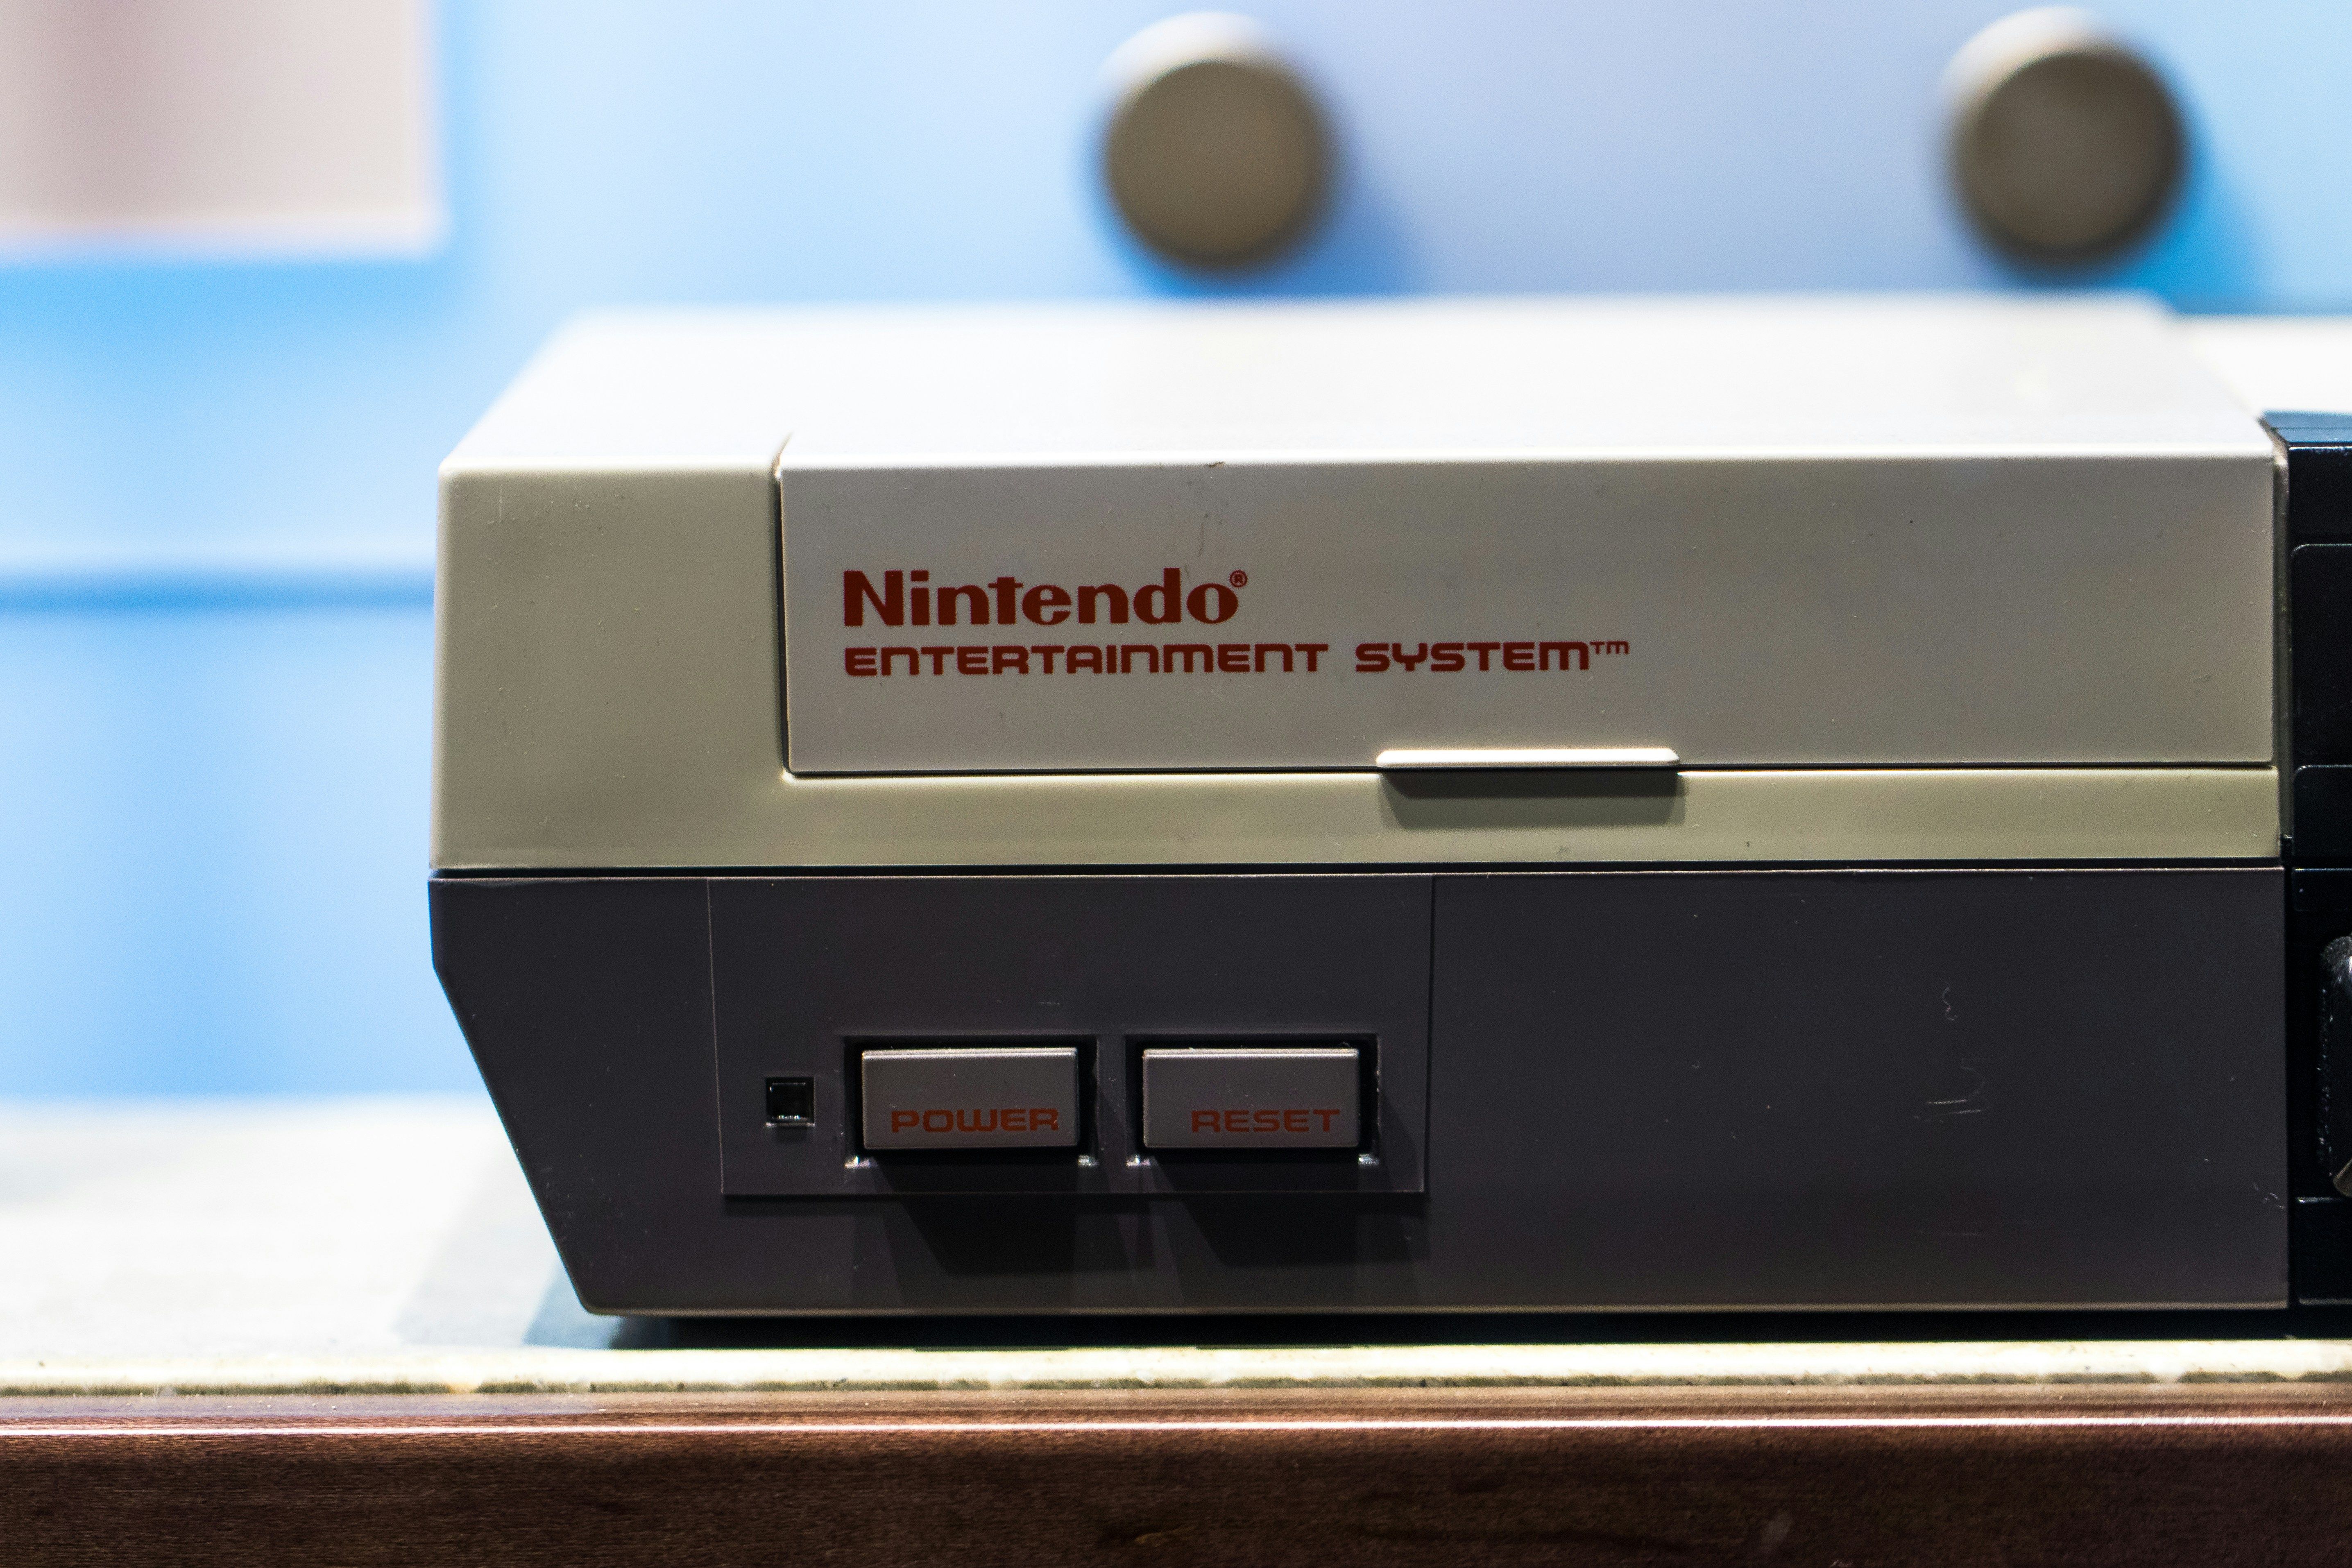 Image shows NES system on a table.